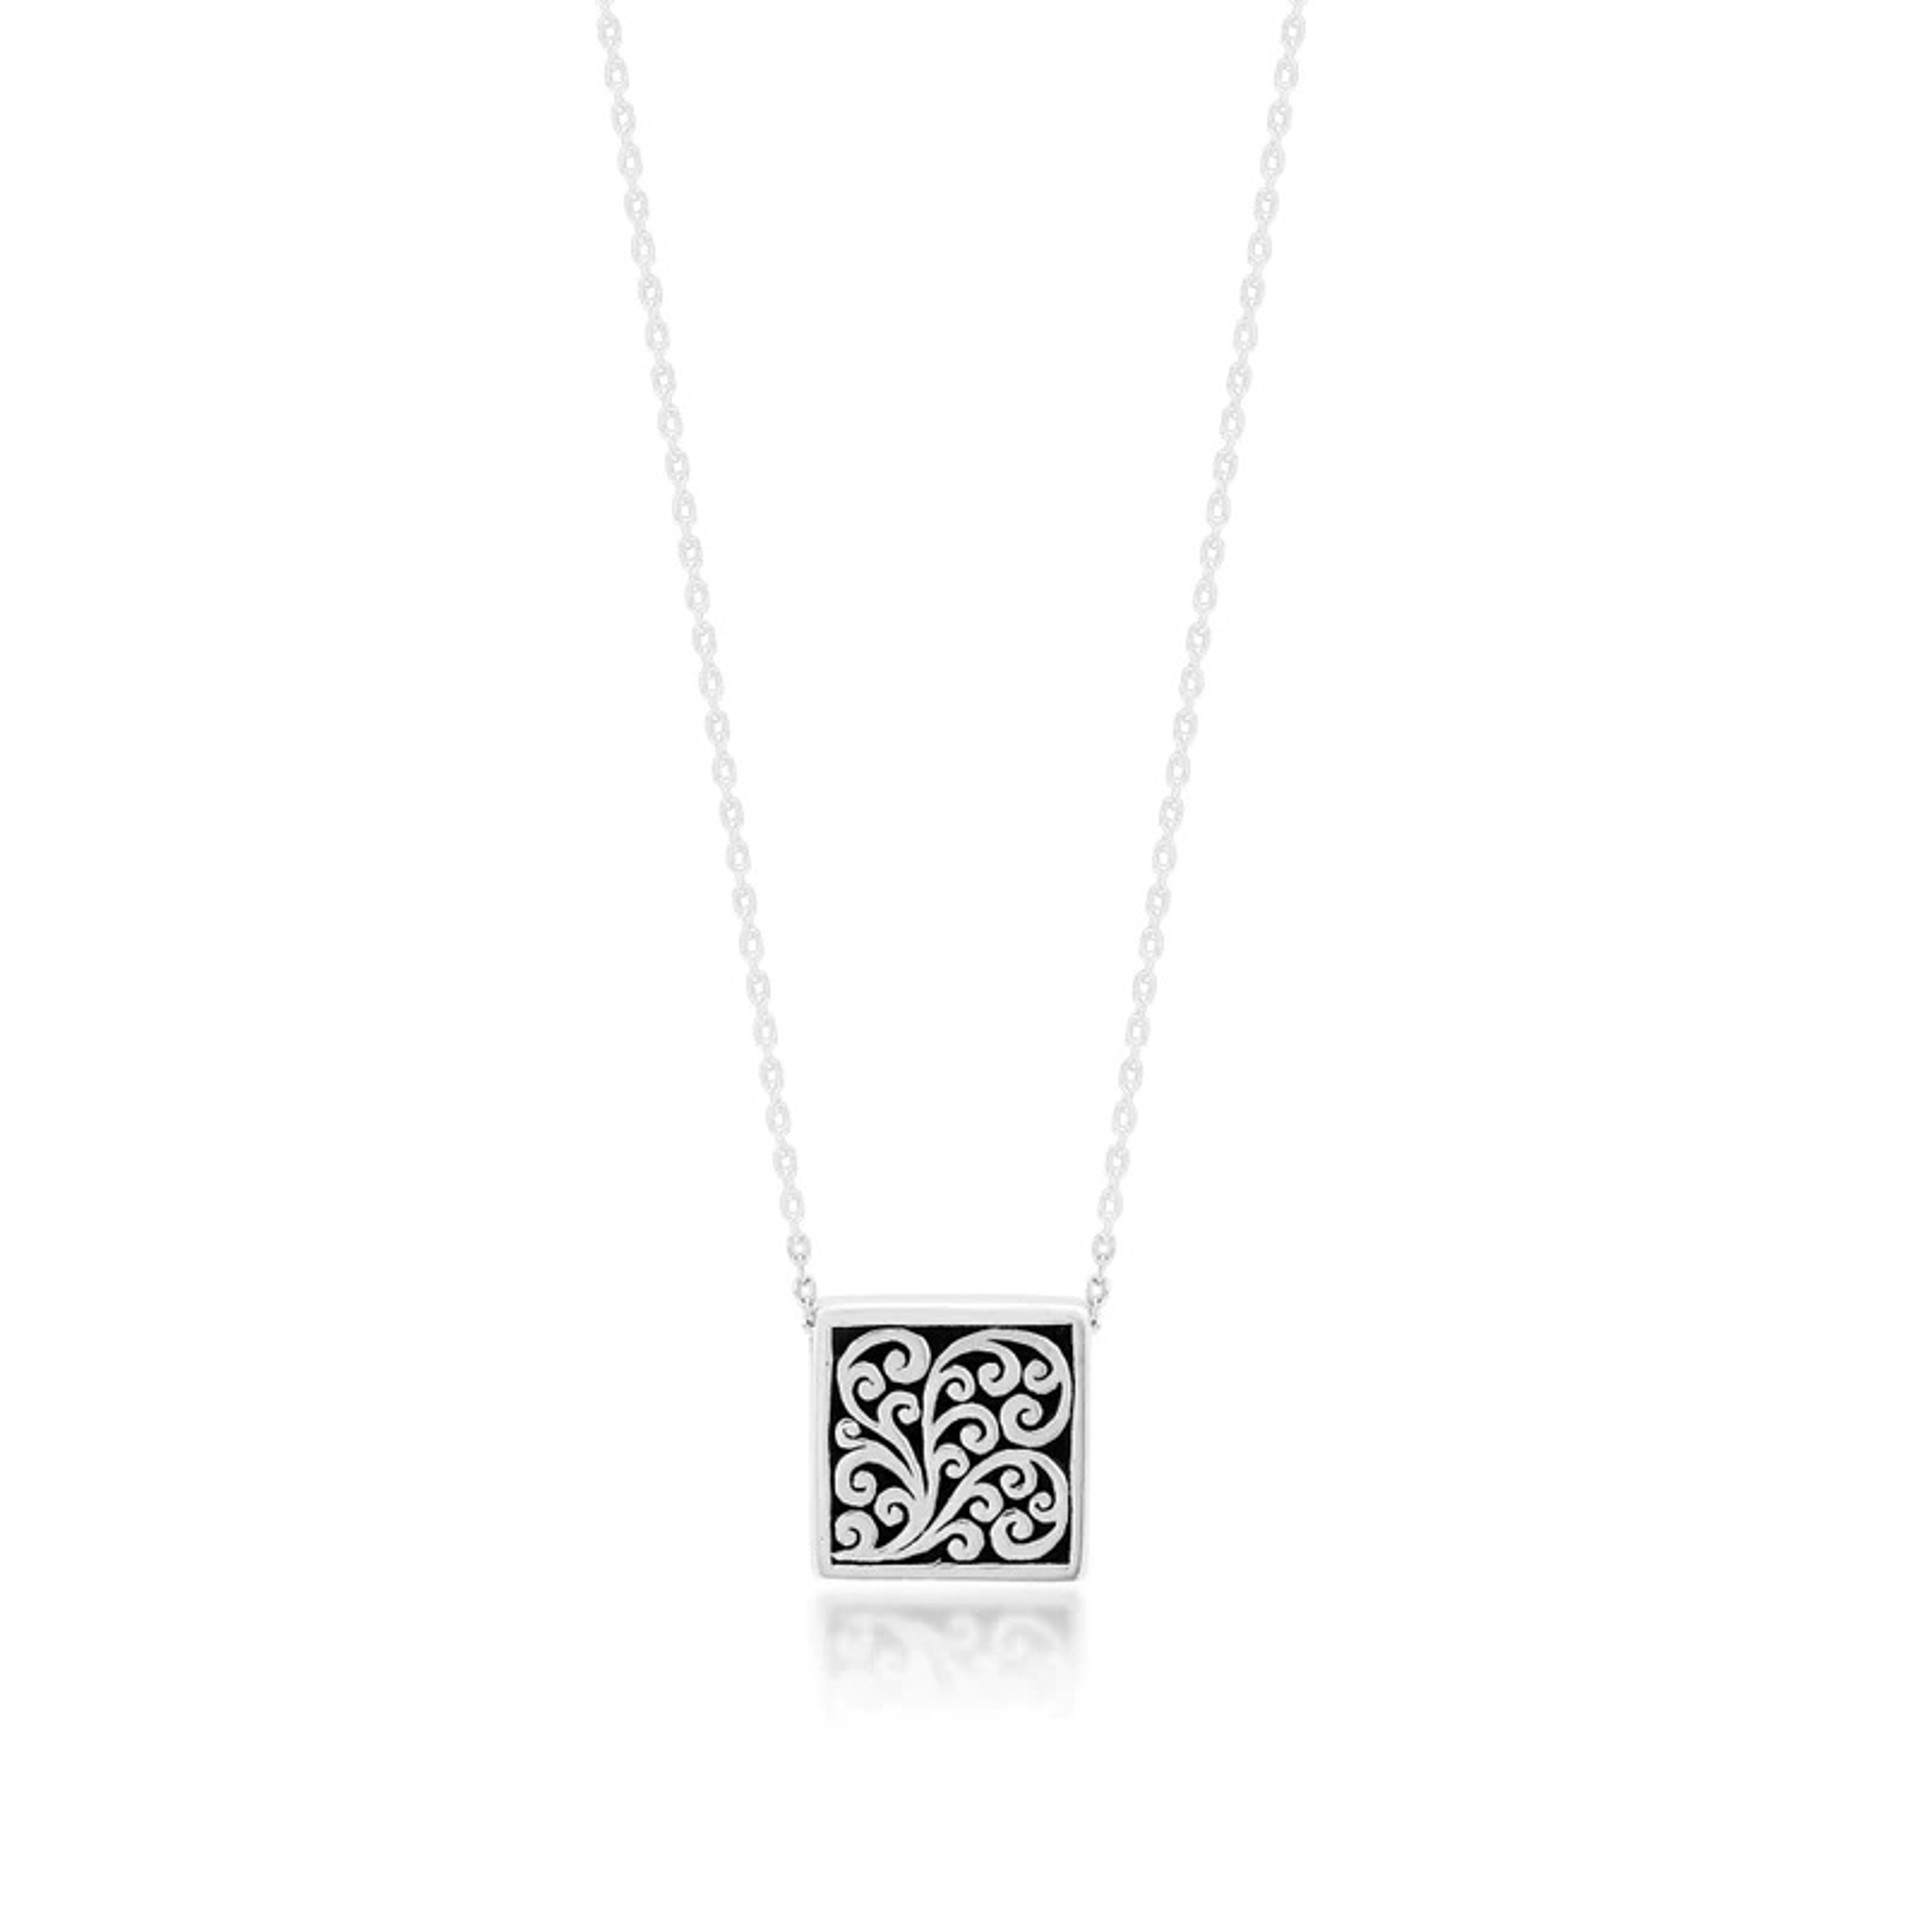 1080 Square Pendant LH Scroll Necklace (SO) by Lois Hill